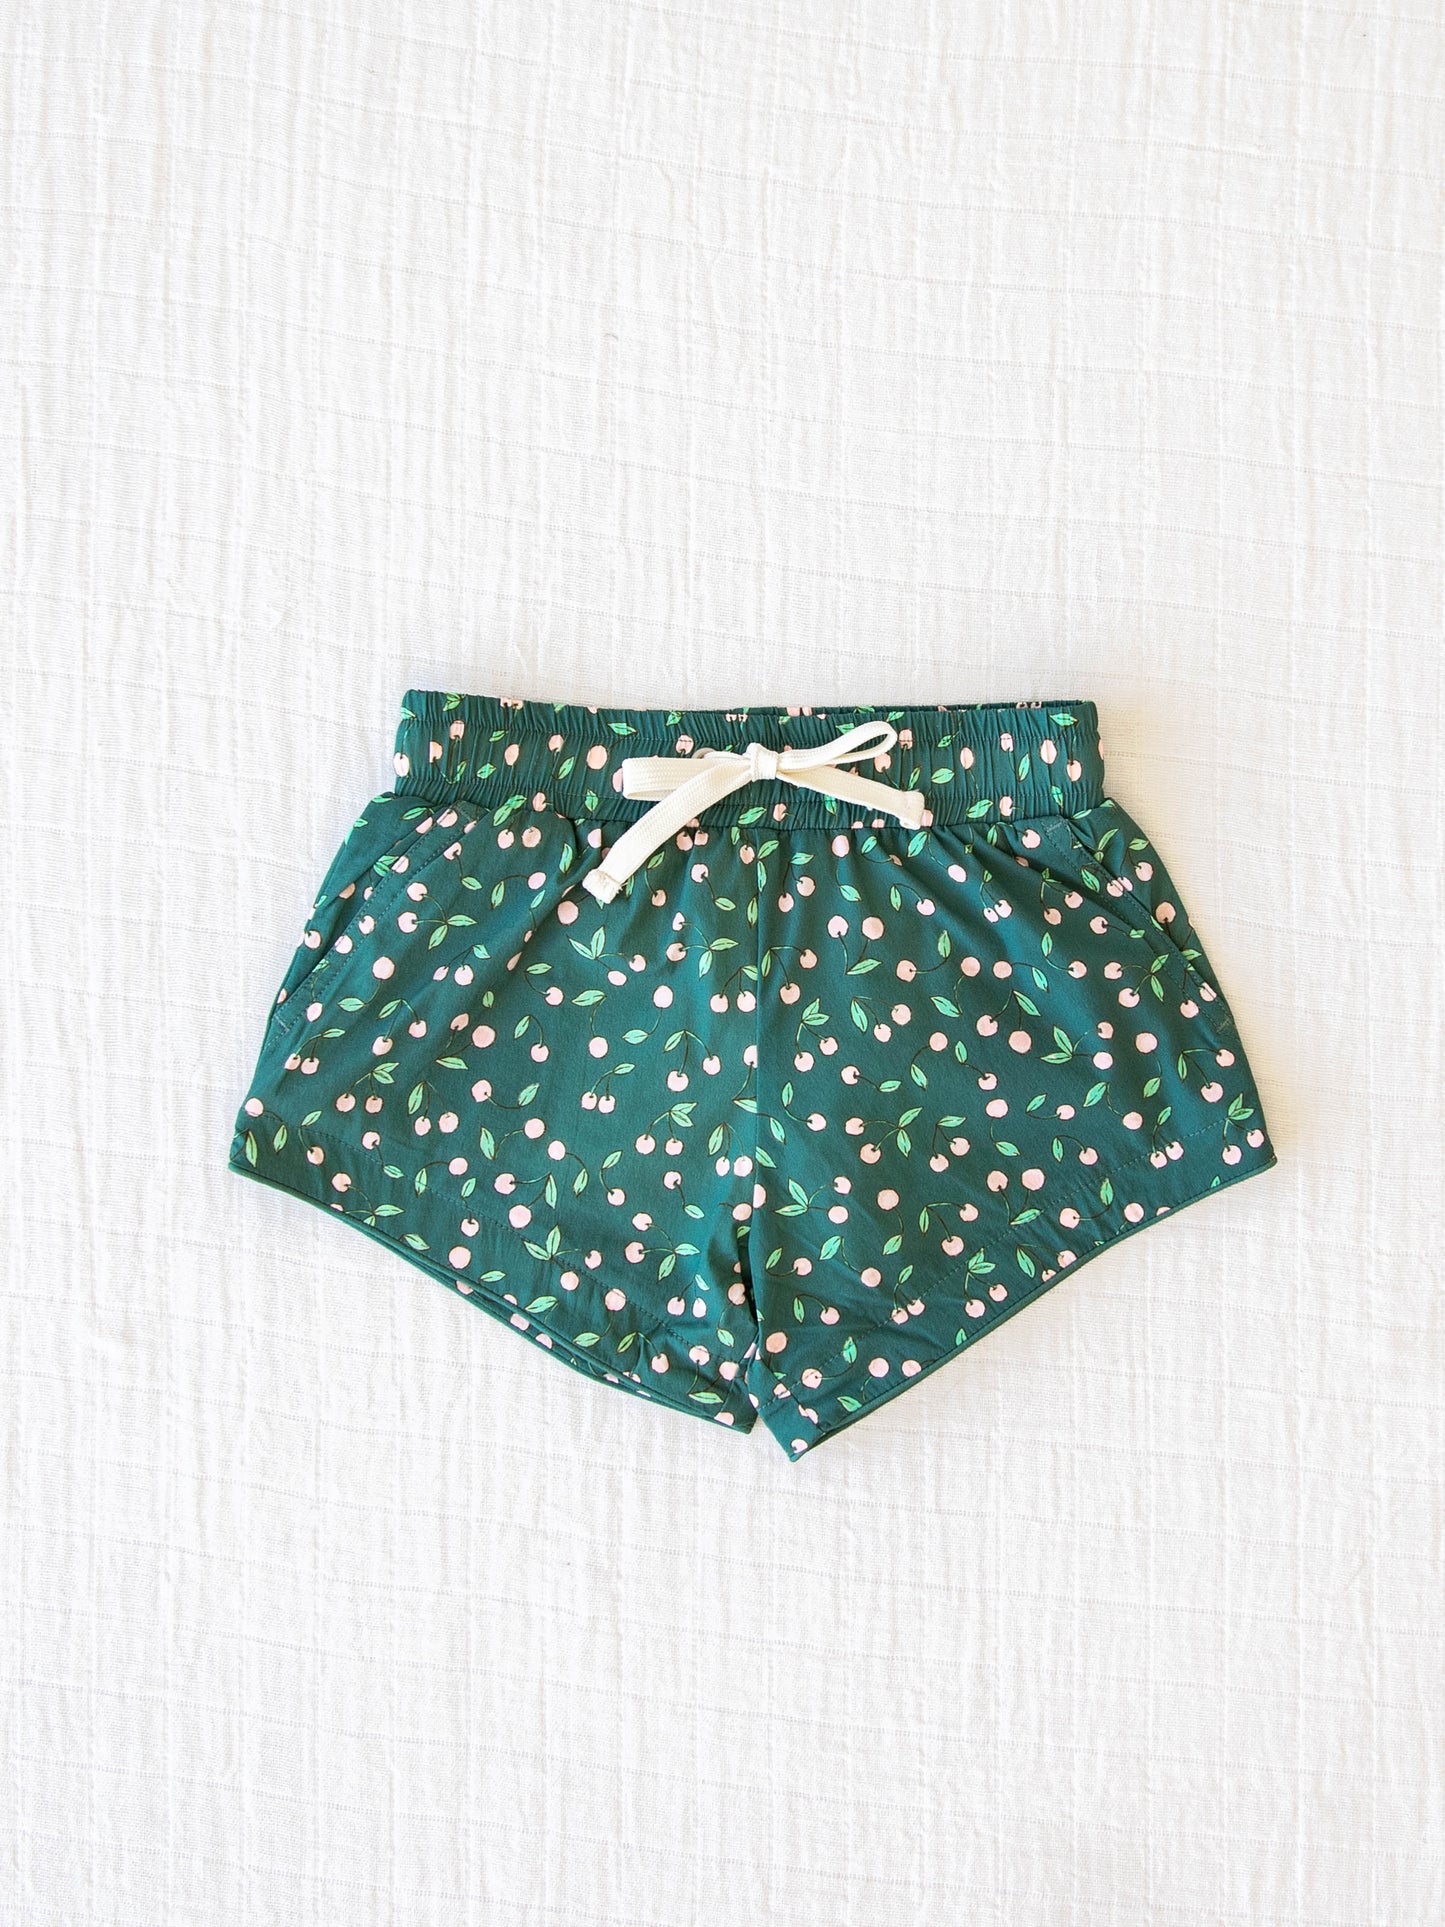 European cut style of our Boy's Everyday Lined Trunks – Cherry on Top. This pair of trunks is a pattern of light pink cherries on a dark green background.